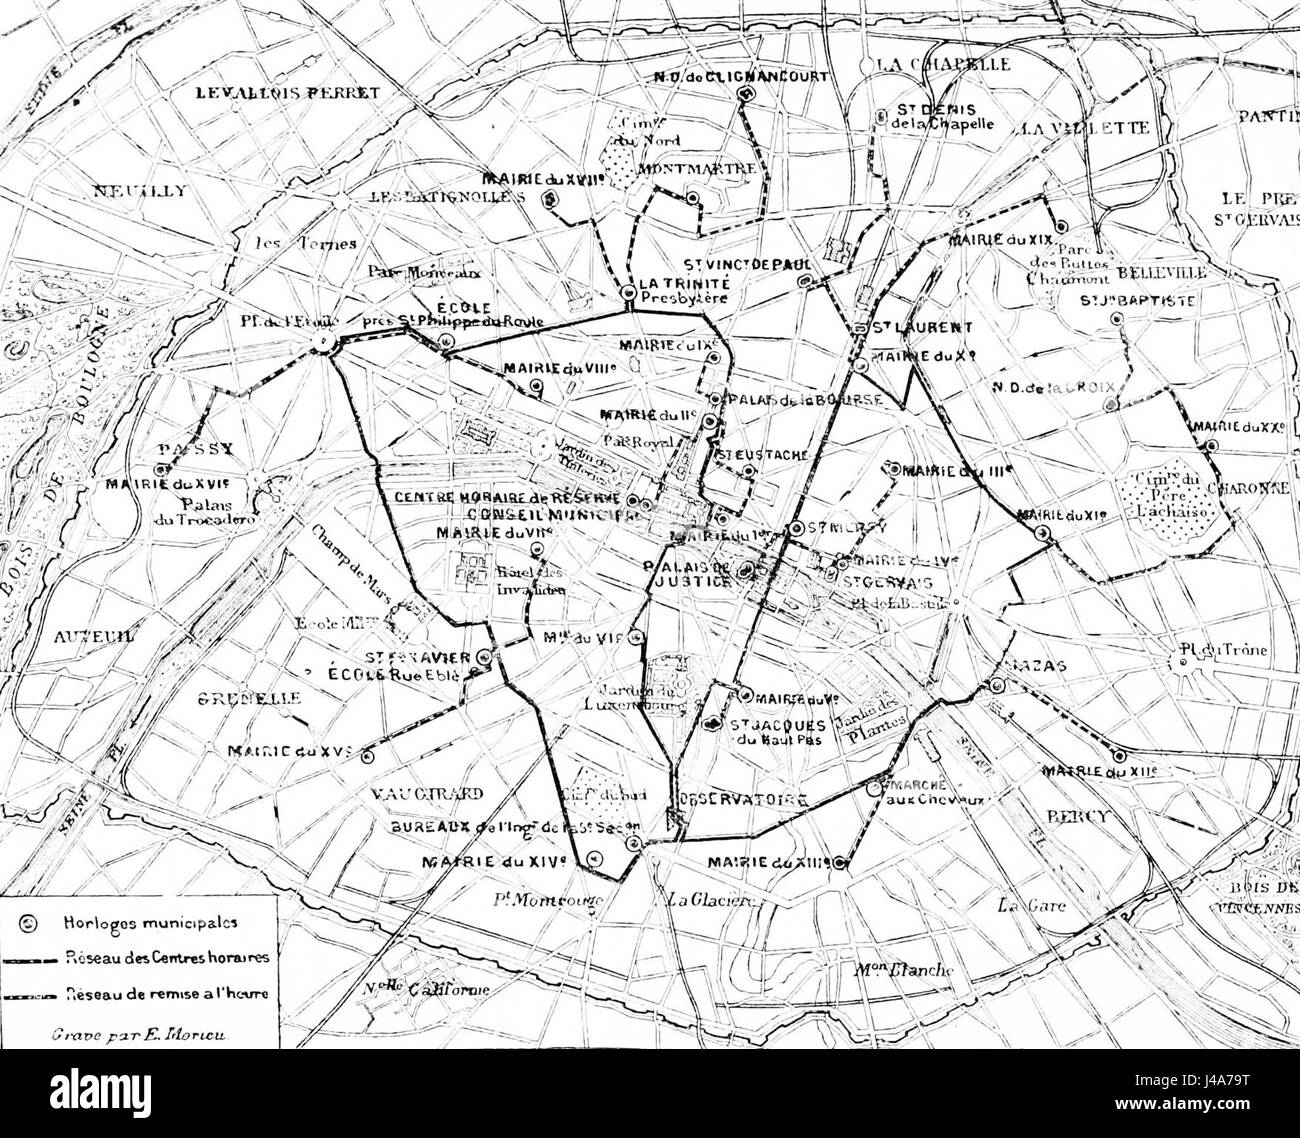 PSM V20 D322 Map of paris with observatory circuit outlined in black Stock Photo